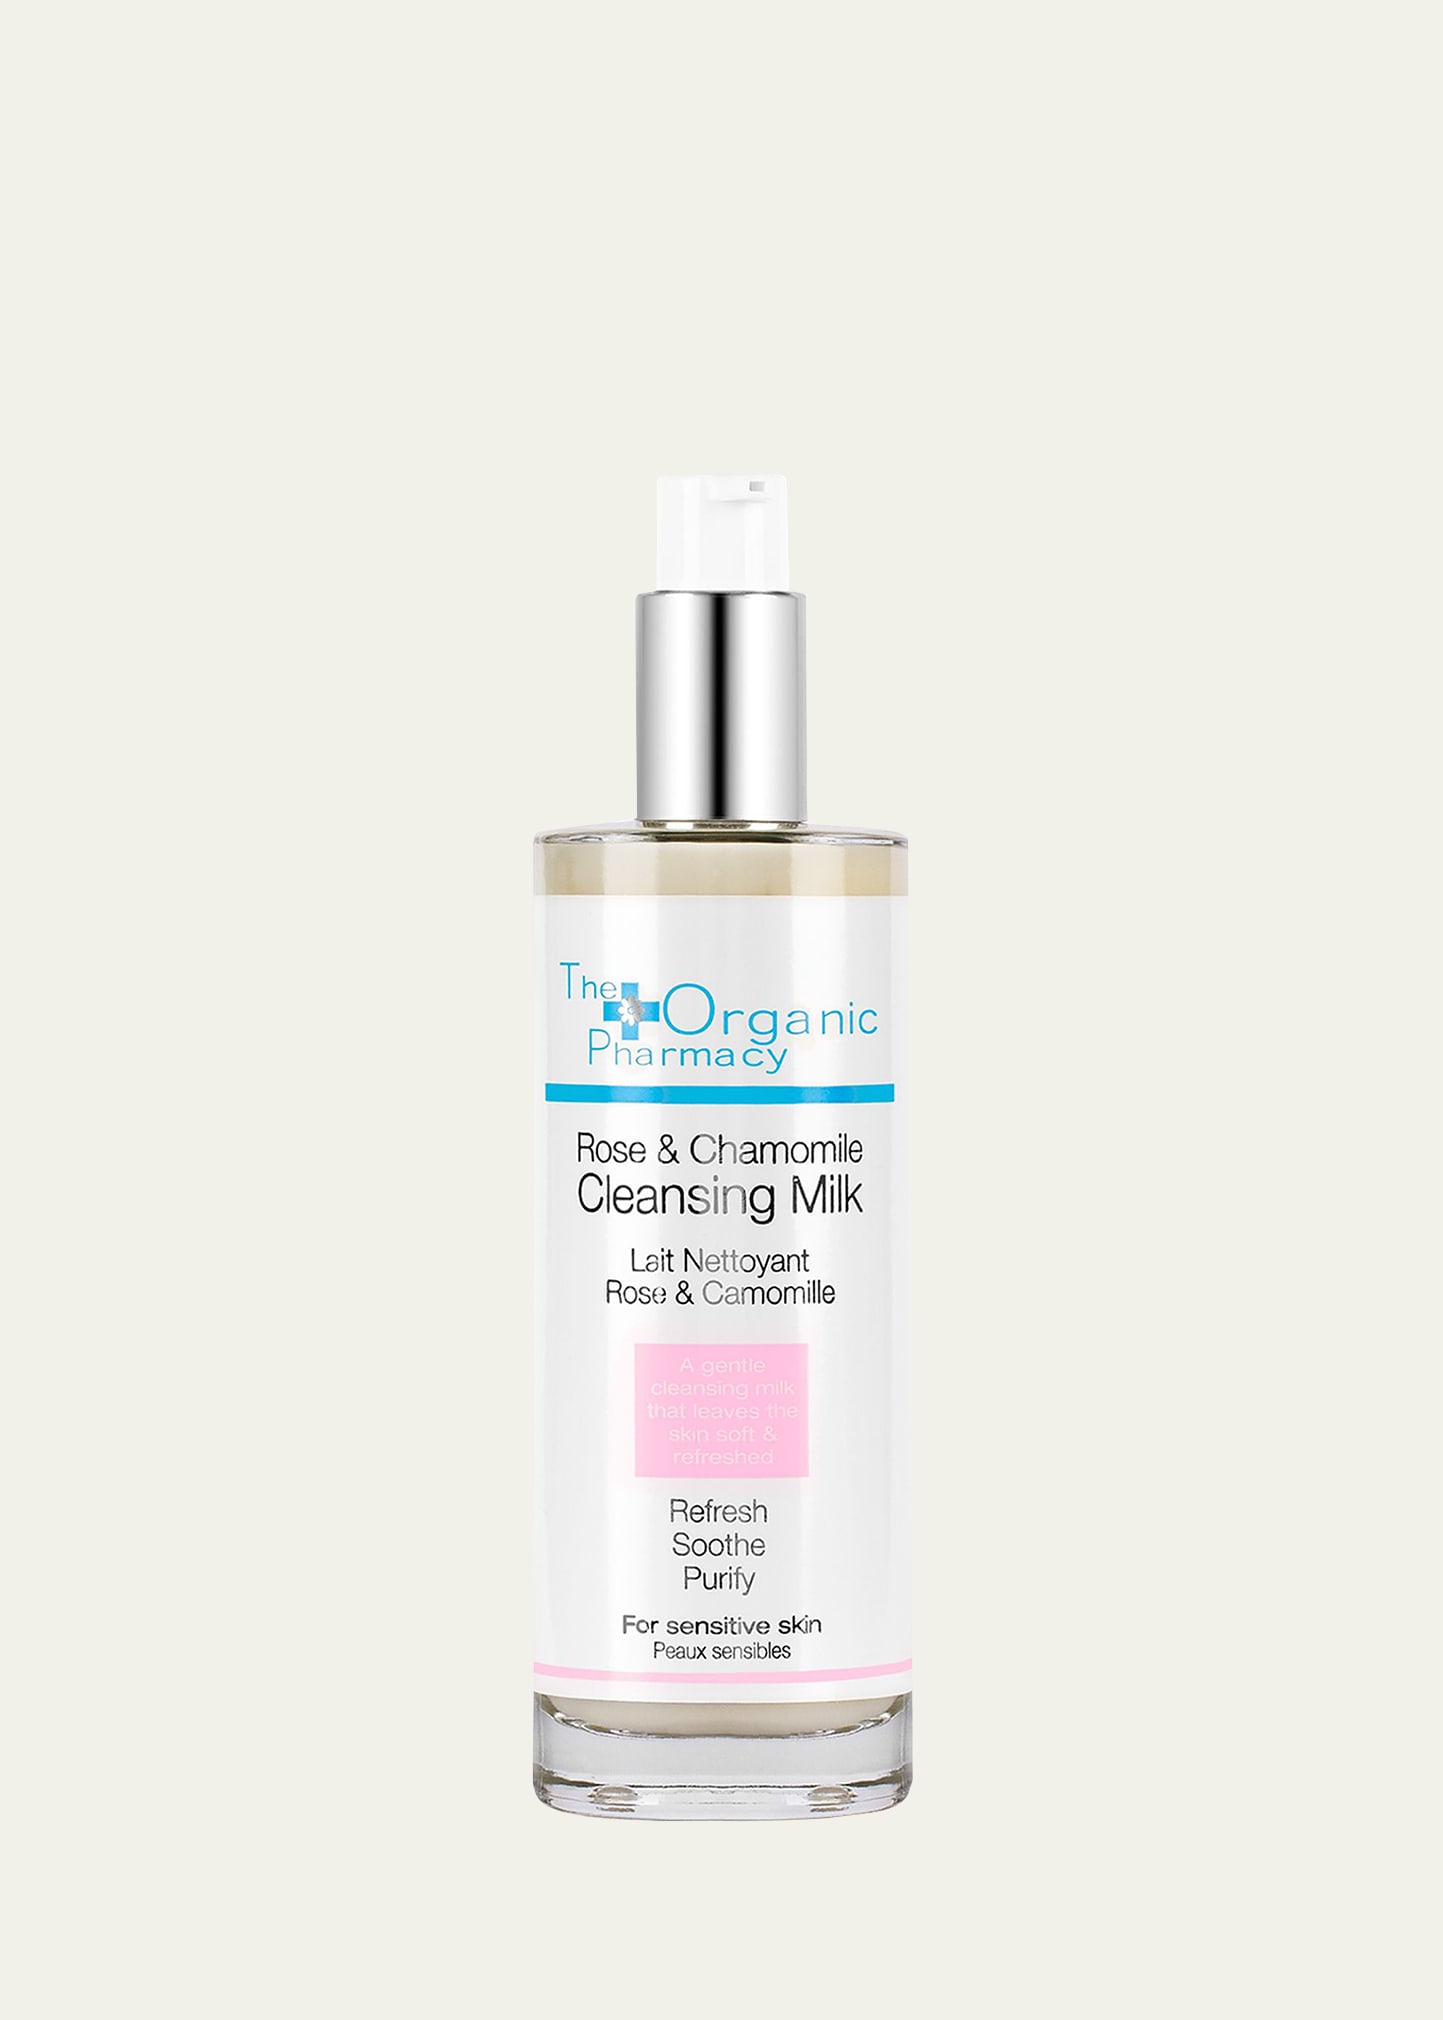 Rose and Chamomile Cleansing Milk, 3.4 oz.